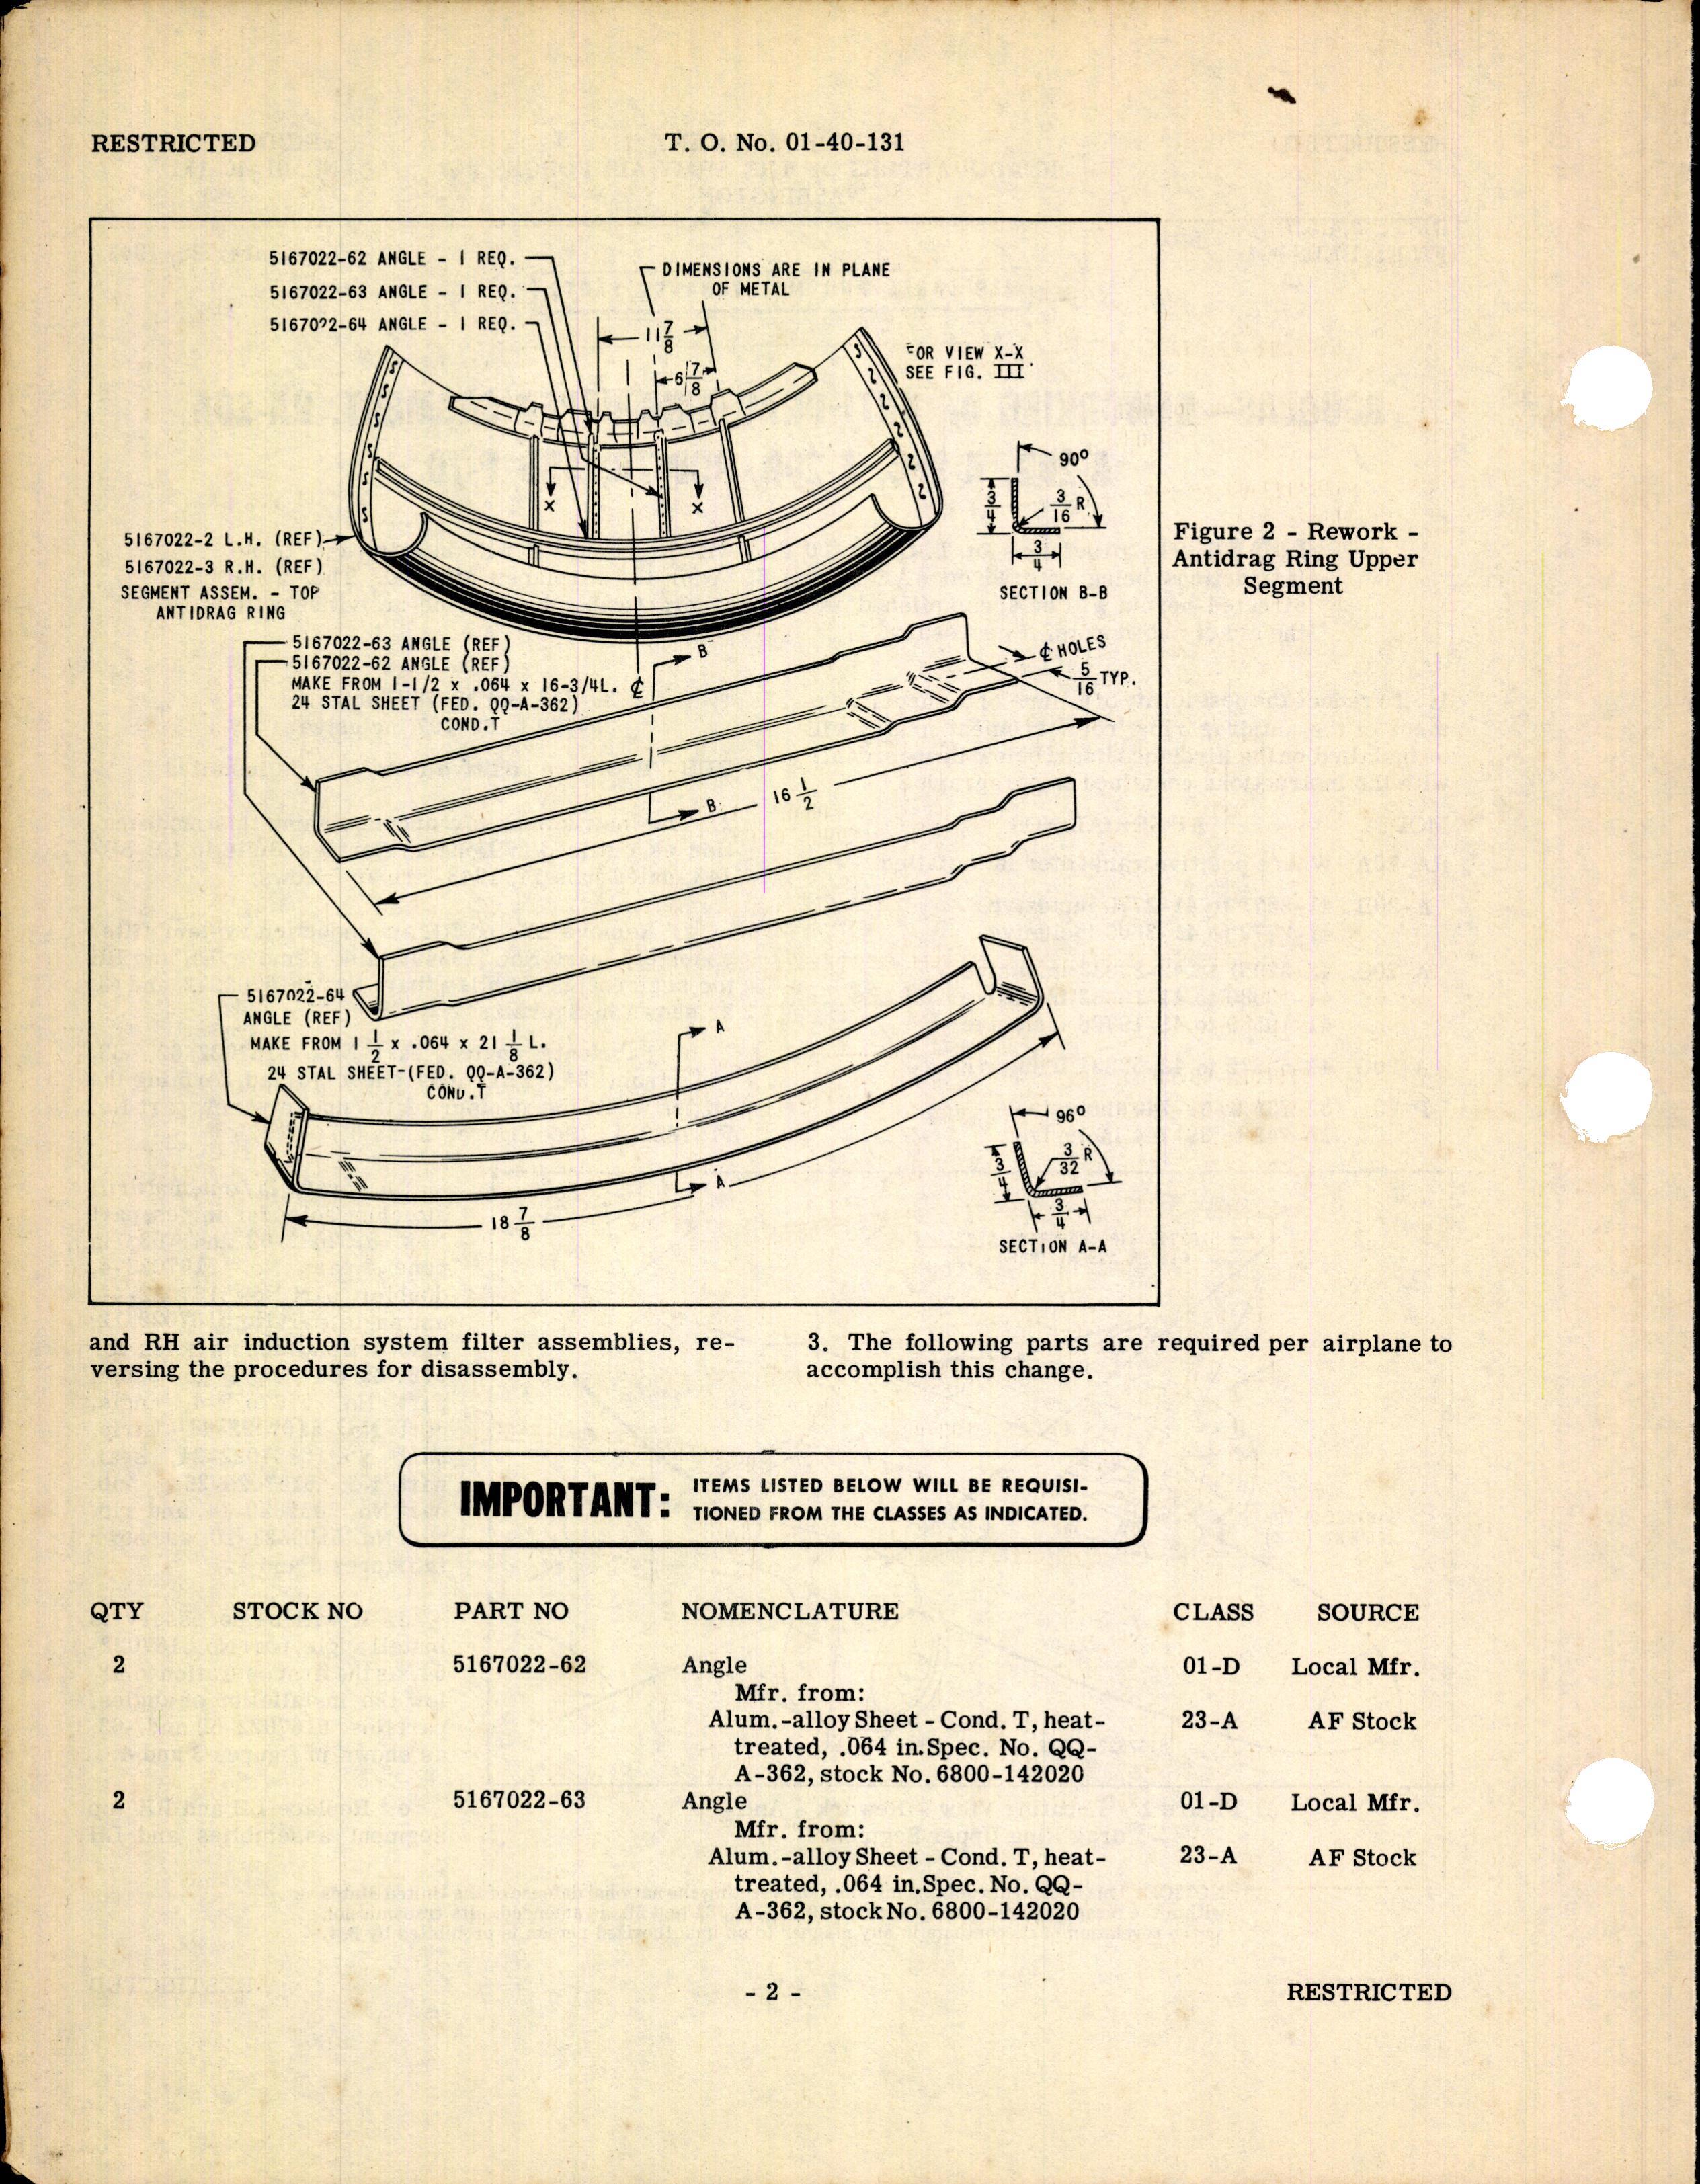 Sample page 2 from AirCorps Library document: Reworking of Anti-Drag Ring Upper Segment